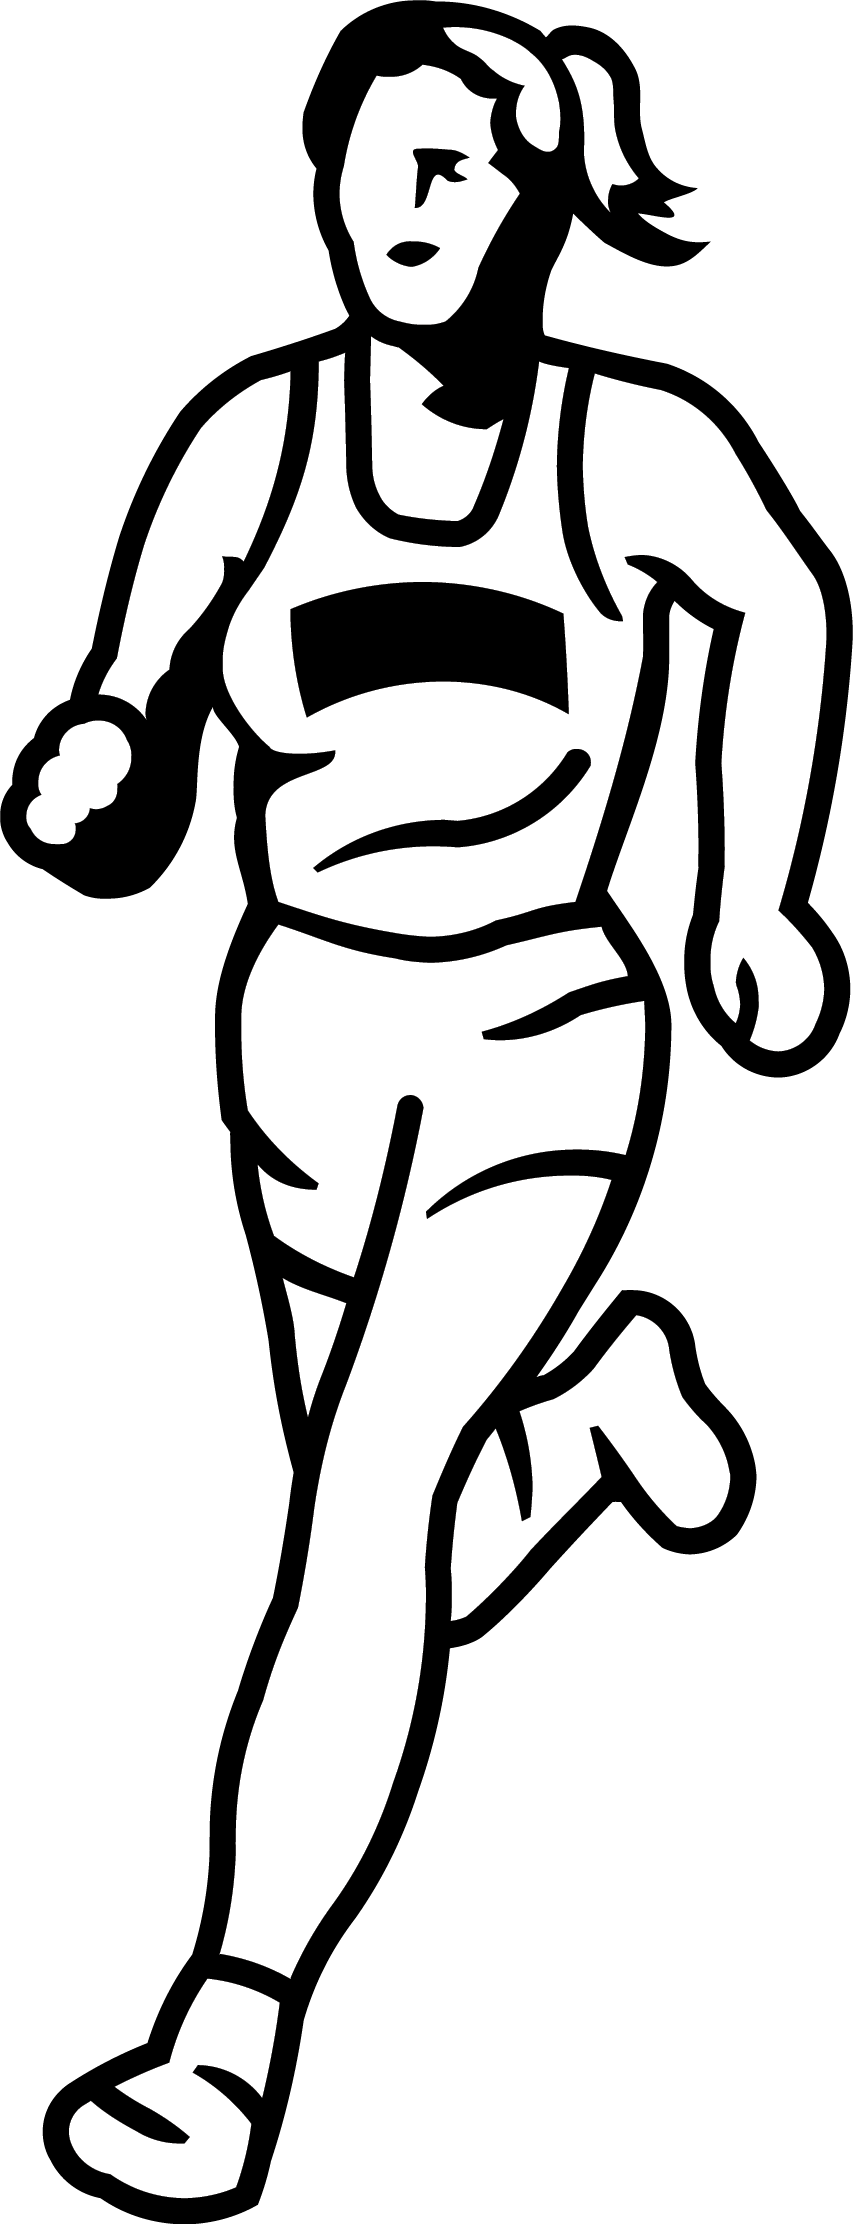 Sports and i . Runner clipart leisure